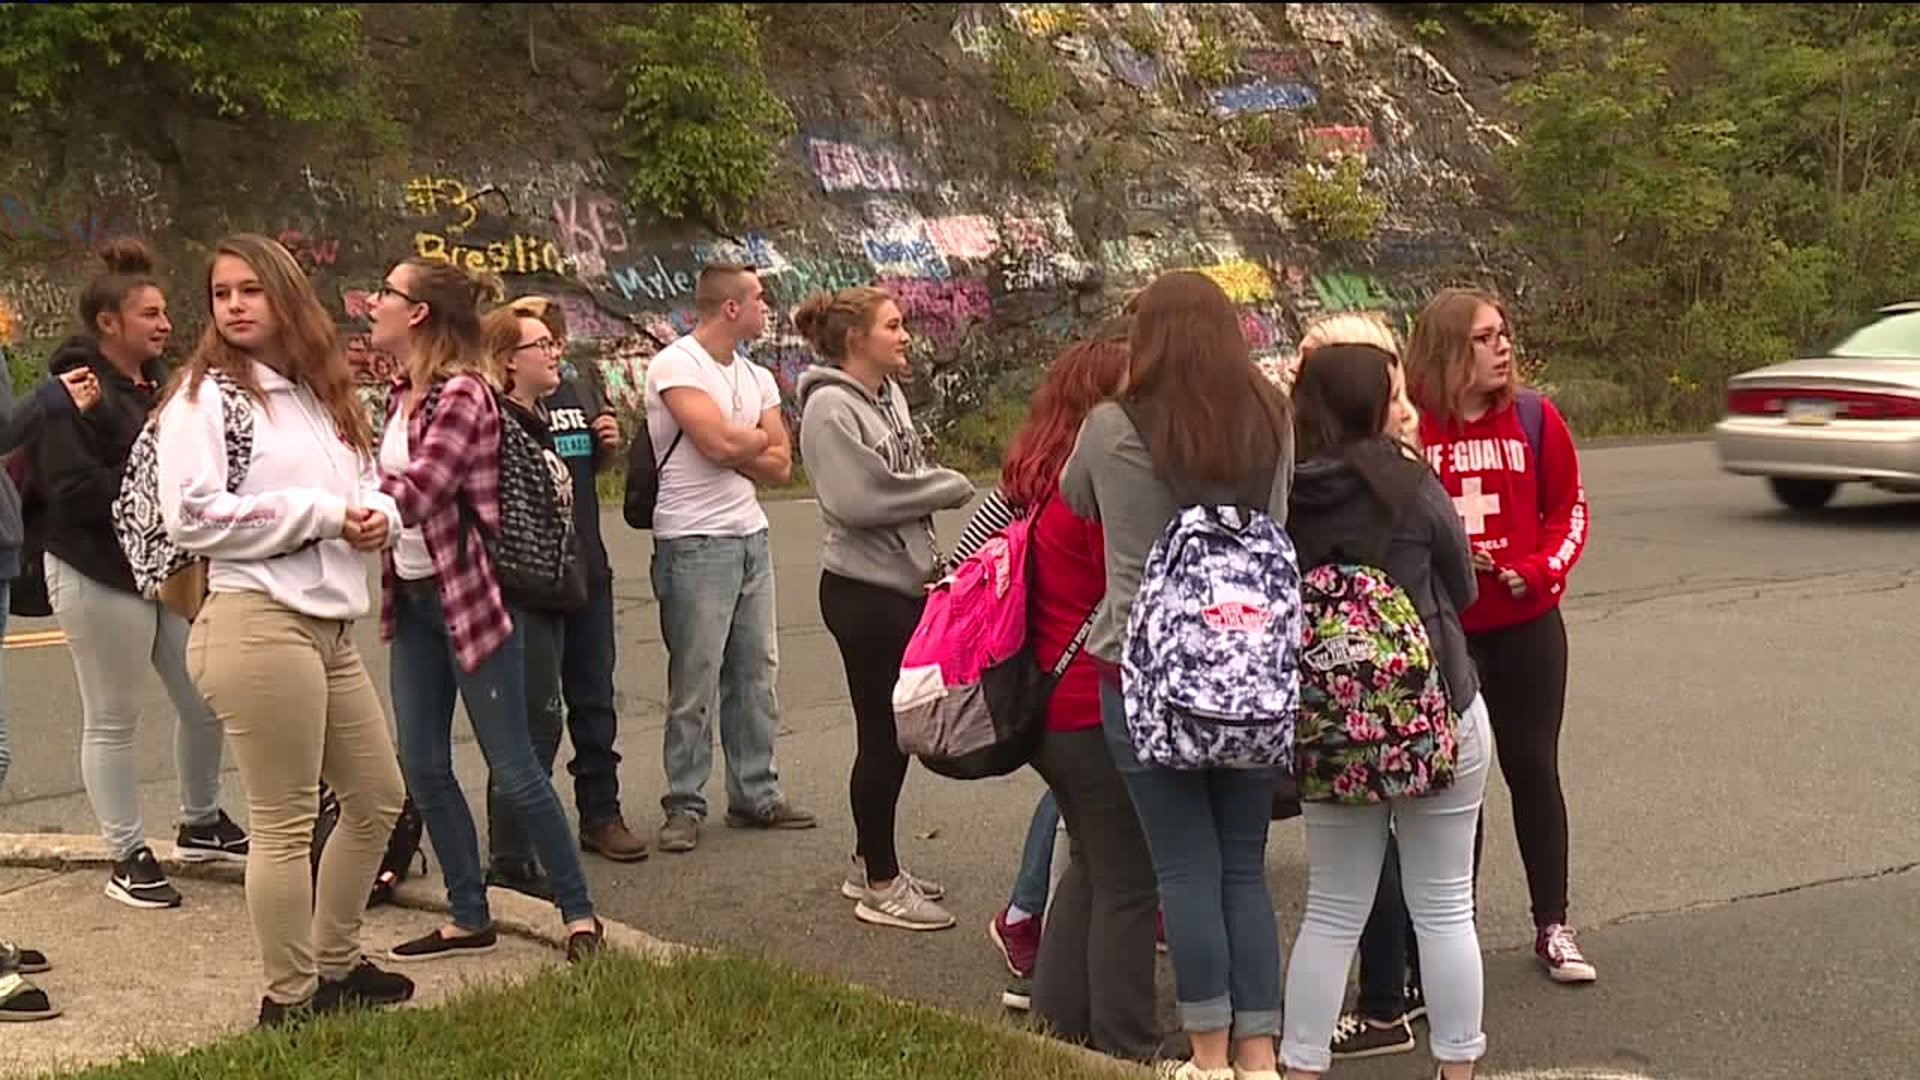 Students Protesting District's Dress Code in Shamokin Area